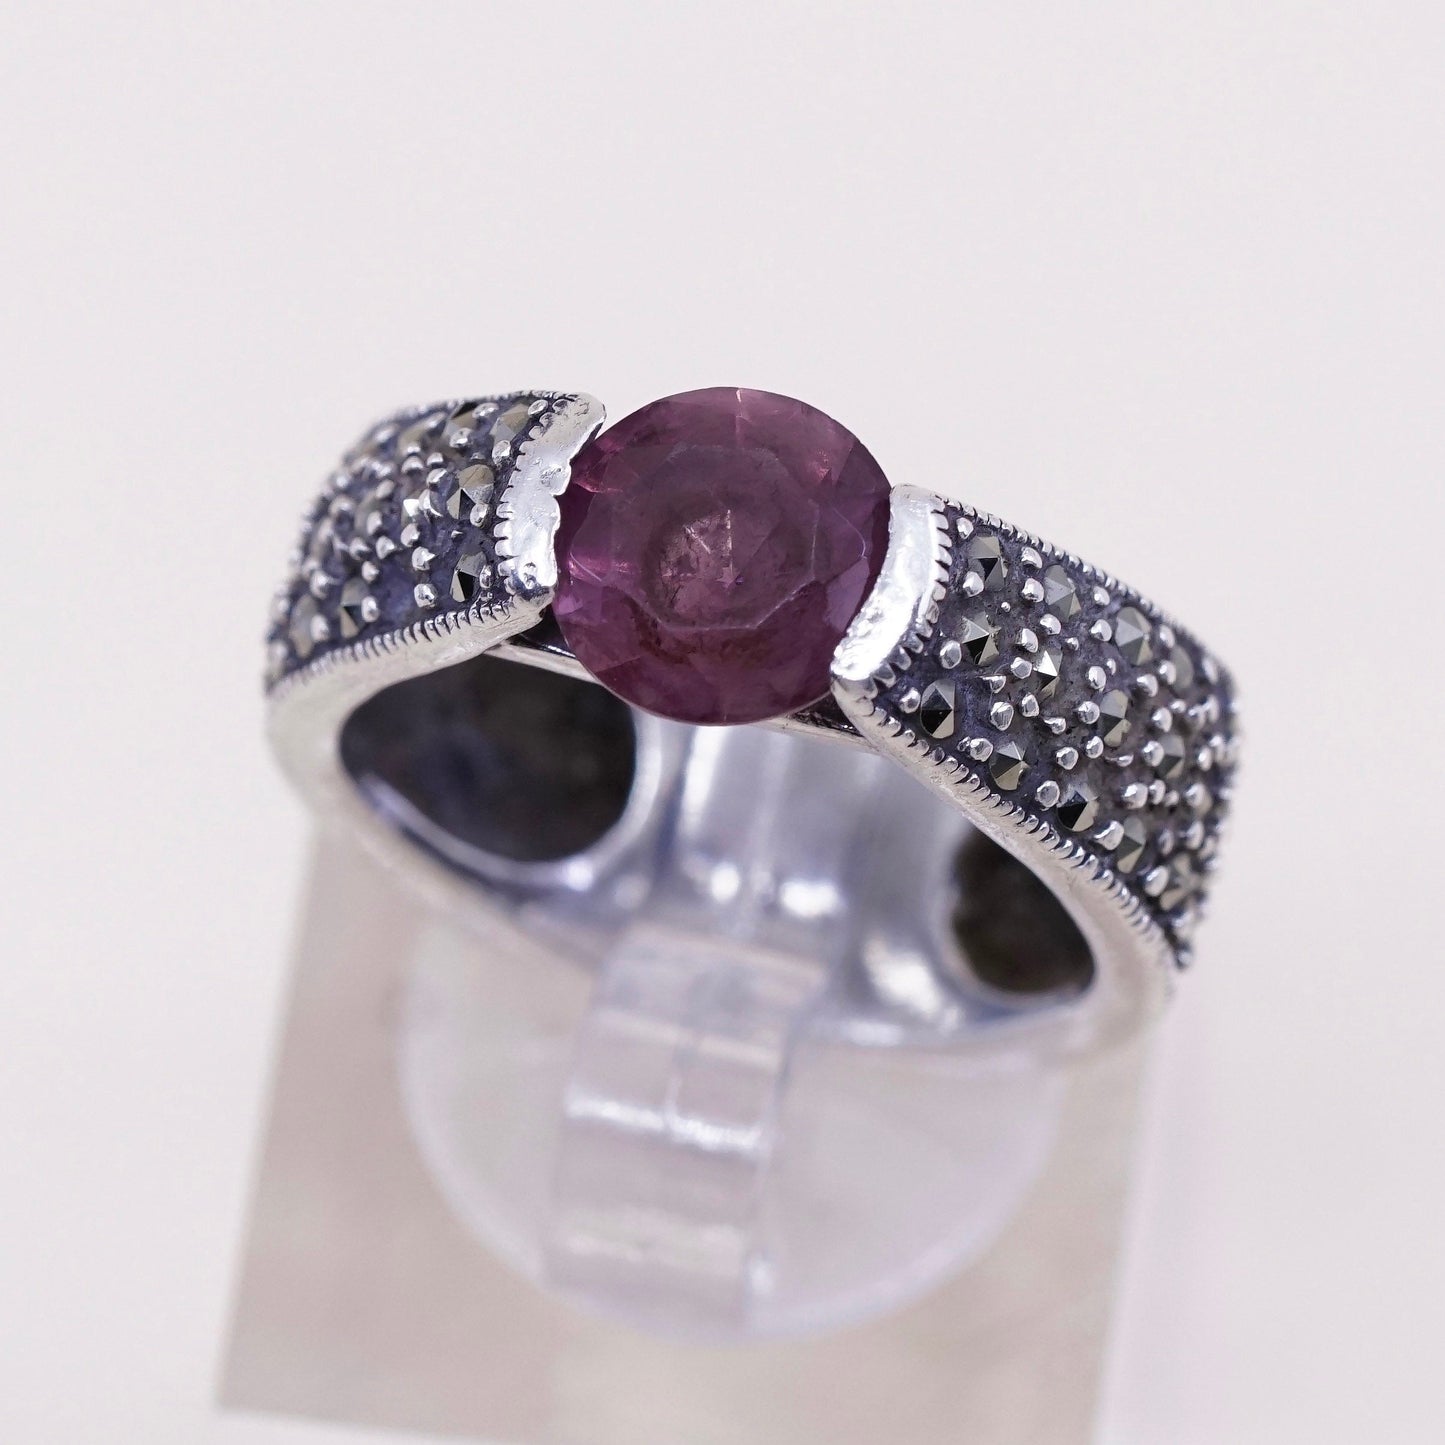 sz 5.5, Vintage sterling 925 silver handmade ring with amethyst and marcasite